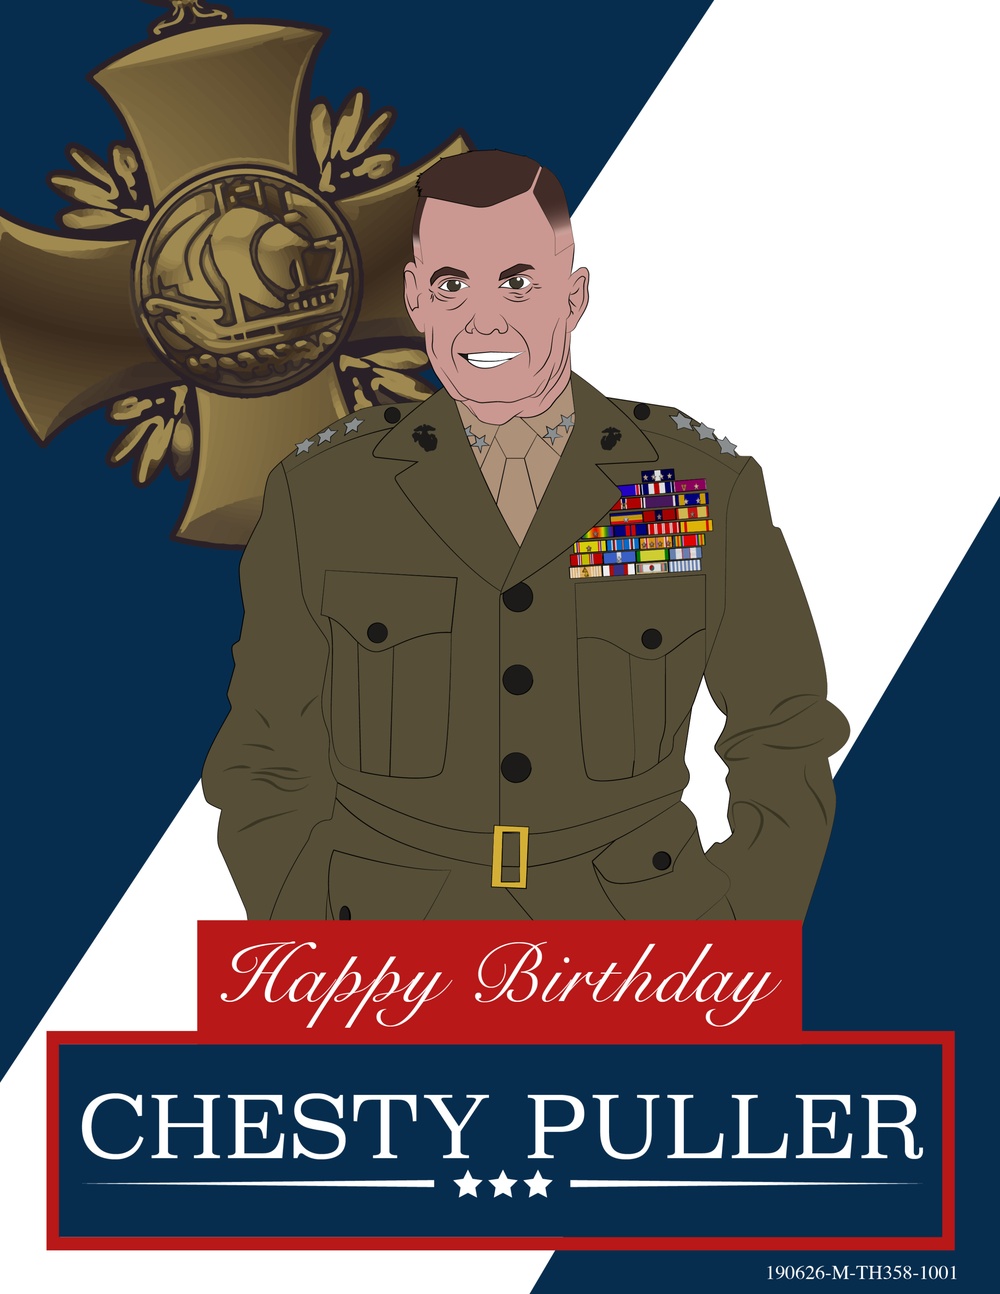 Chesty Puller's 121st Birthday Graphic